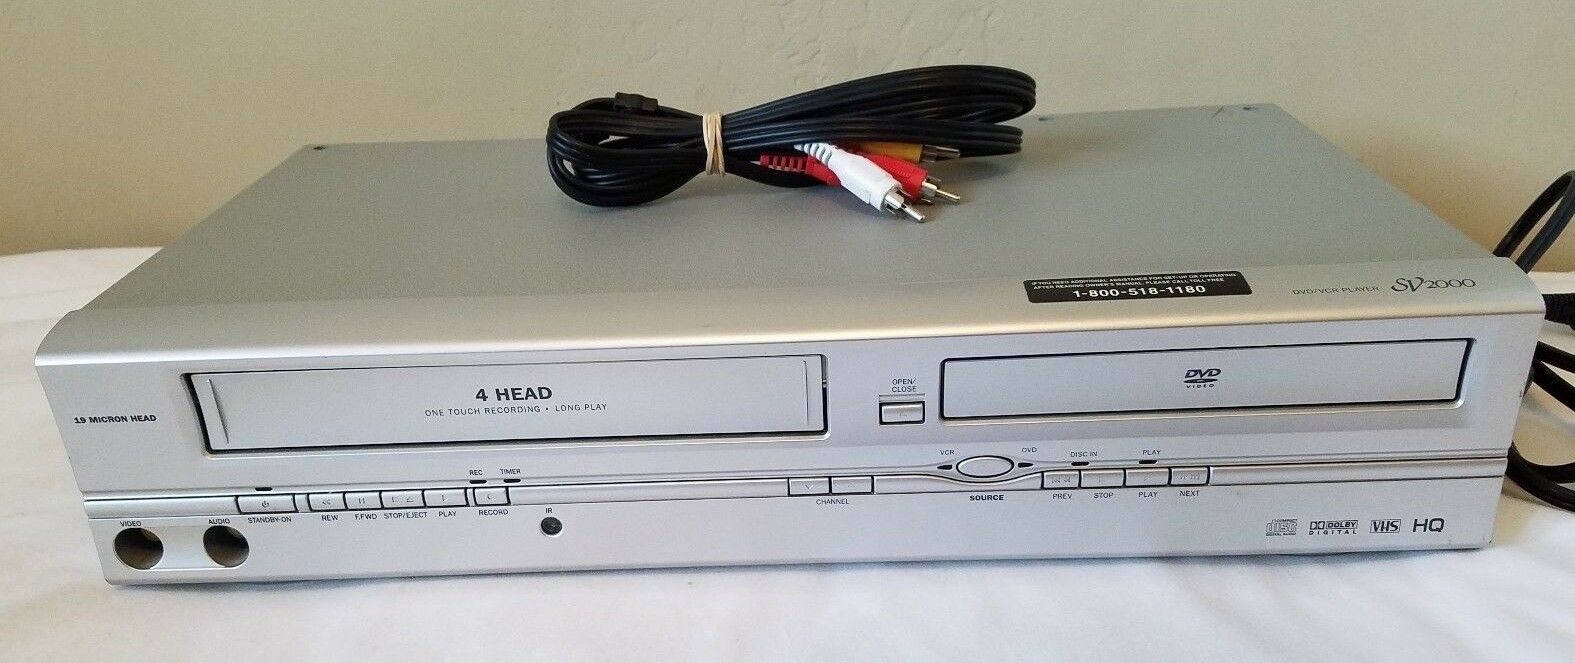 FUNAI SV2000 WV805 DVD Player VHS VCR Combo 2005 NO Remote - Tested